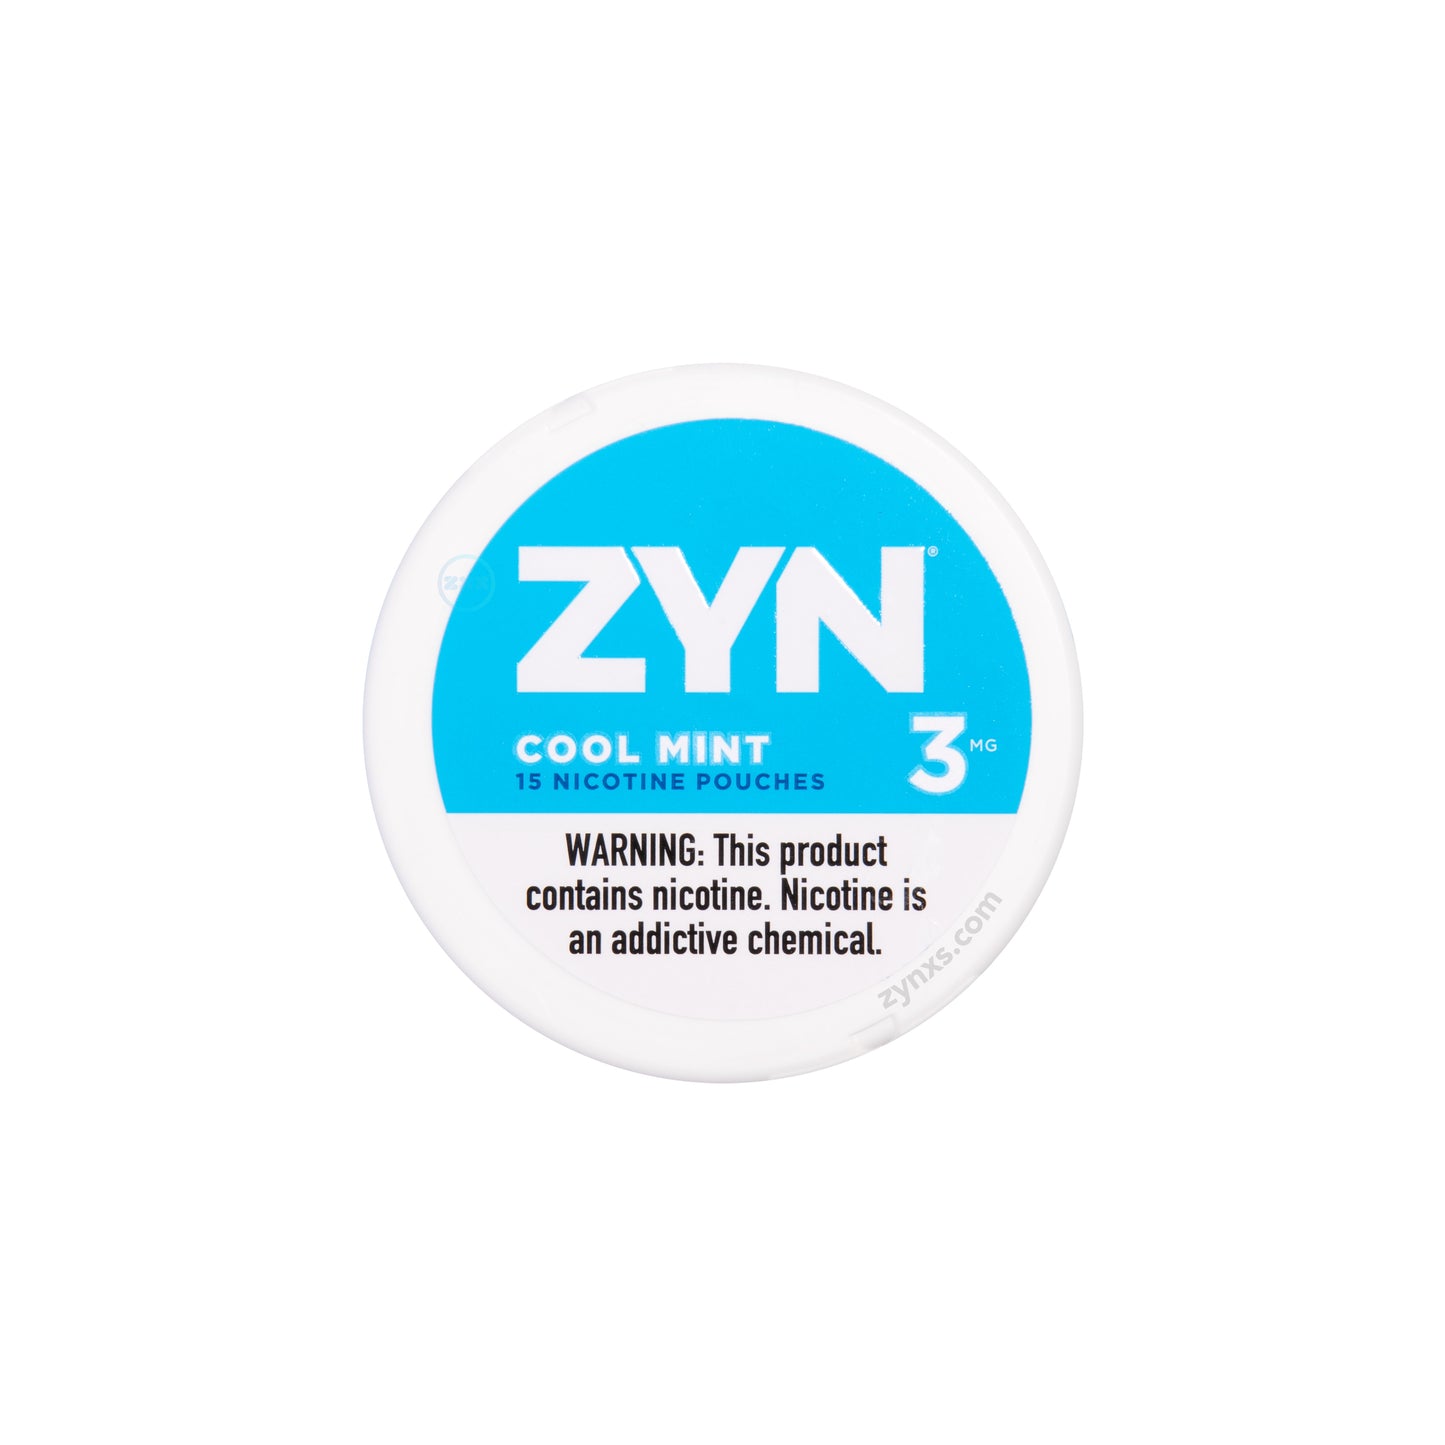 Zyn Cool Mint 3 MG nicotine pouches packaging. The packaging is designed with a refreshing blue and white color palette, indicating the cool mint flavor.